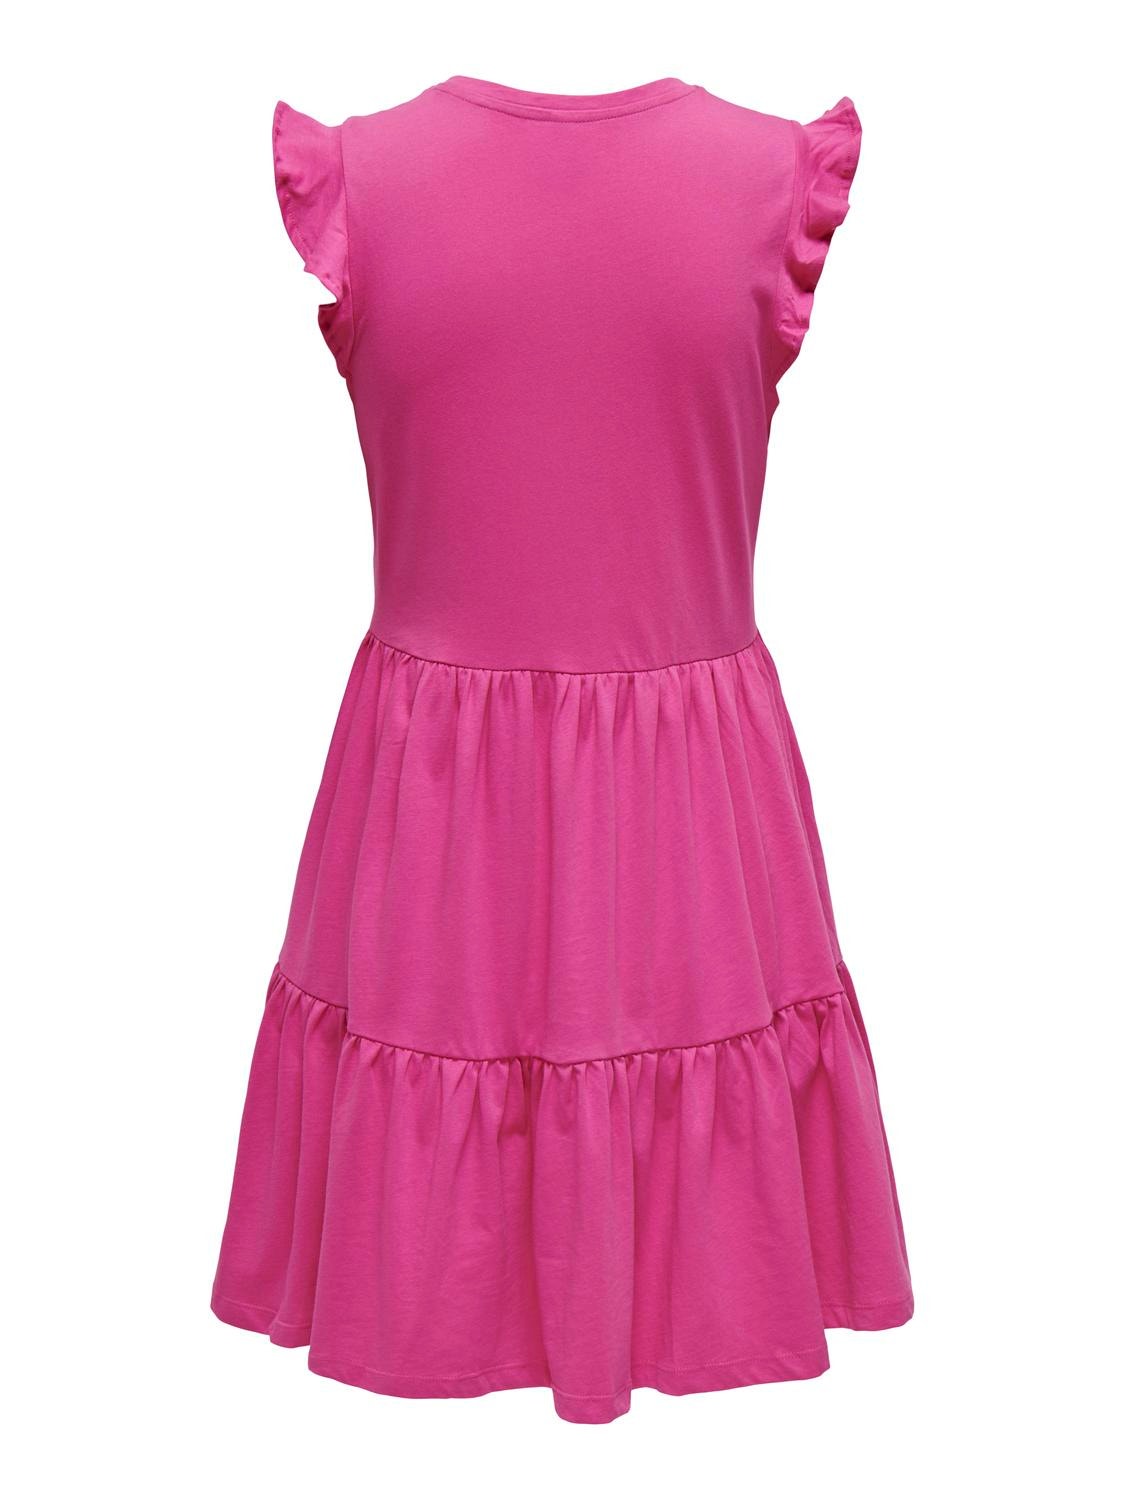 ONLY Mini dress with frills -Raspberry Rose - 15226992